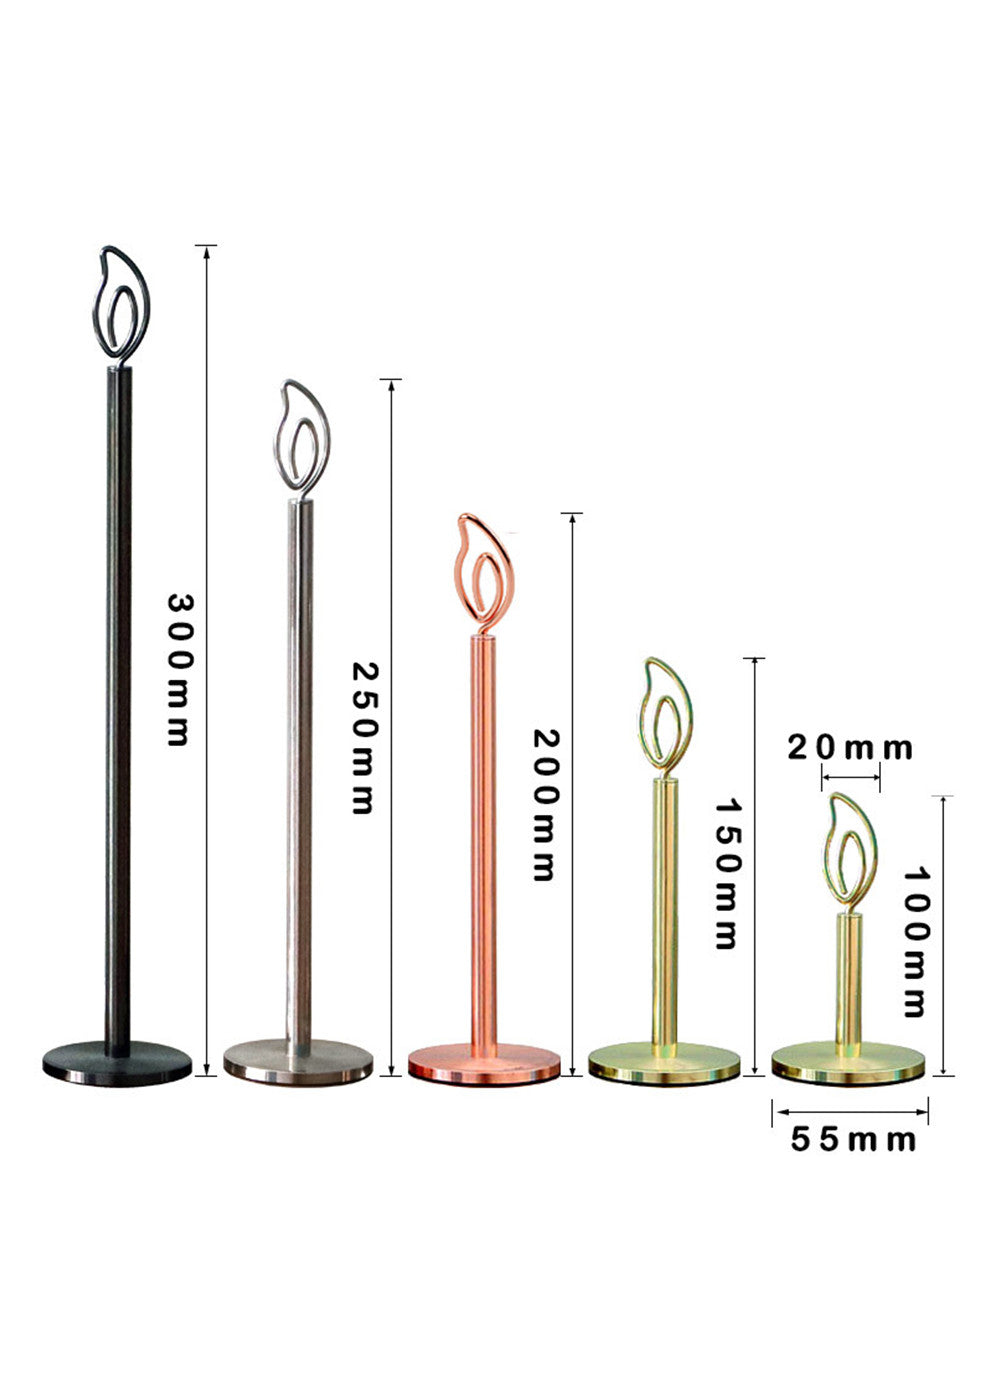 Metal Candle Table Cards Holder